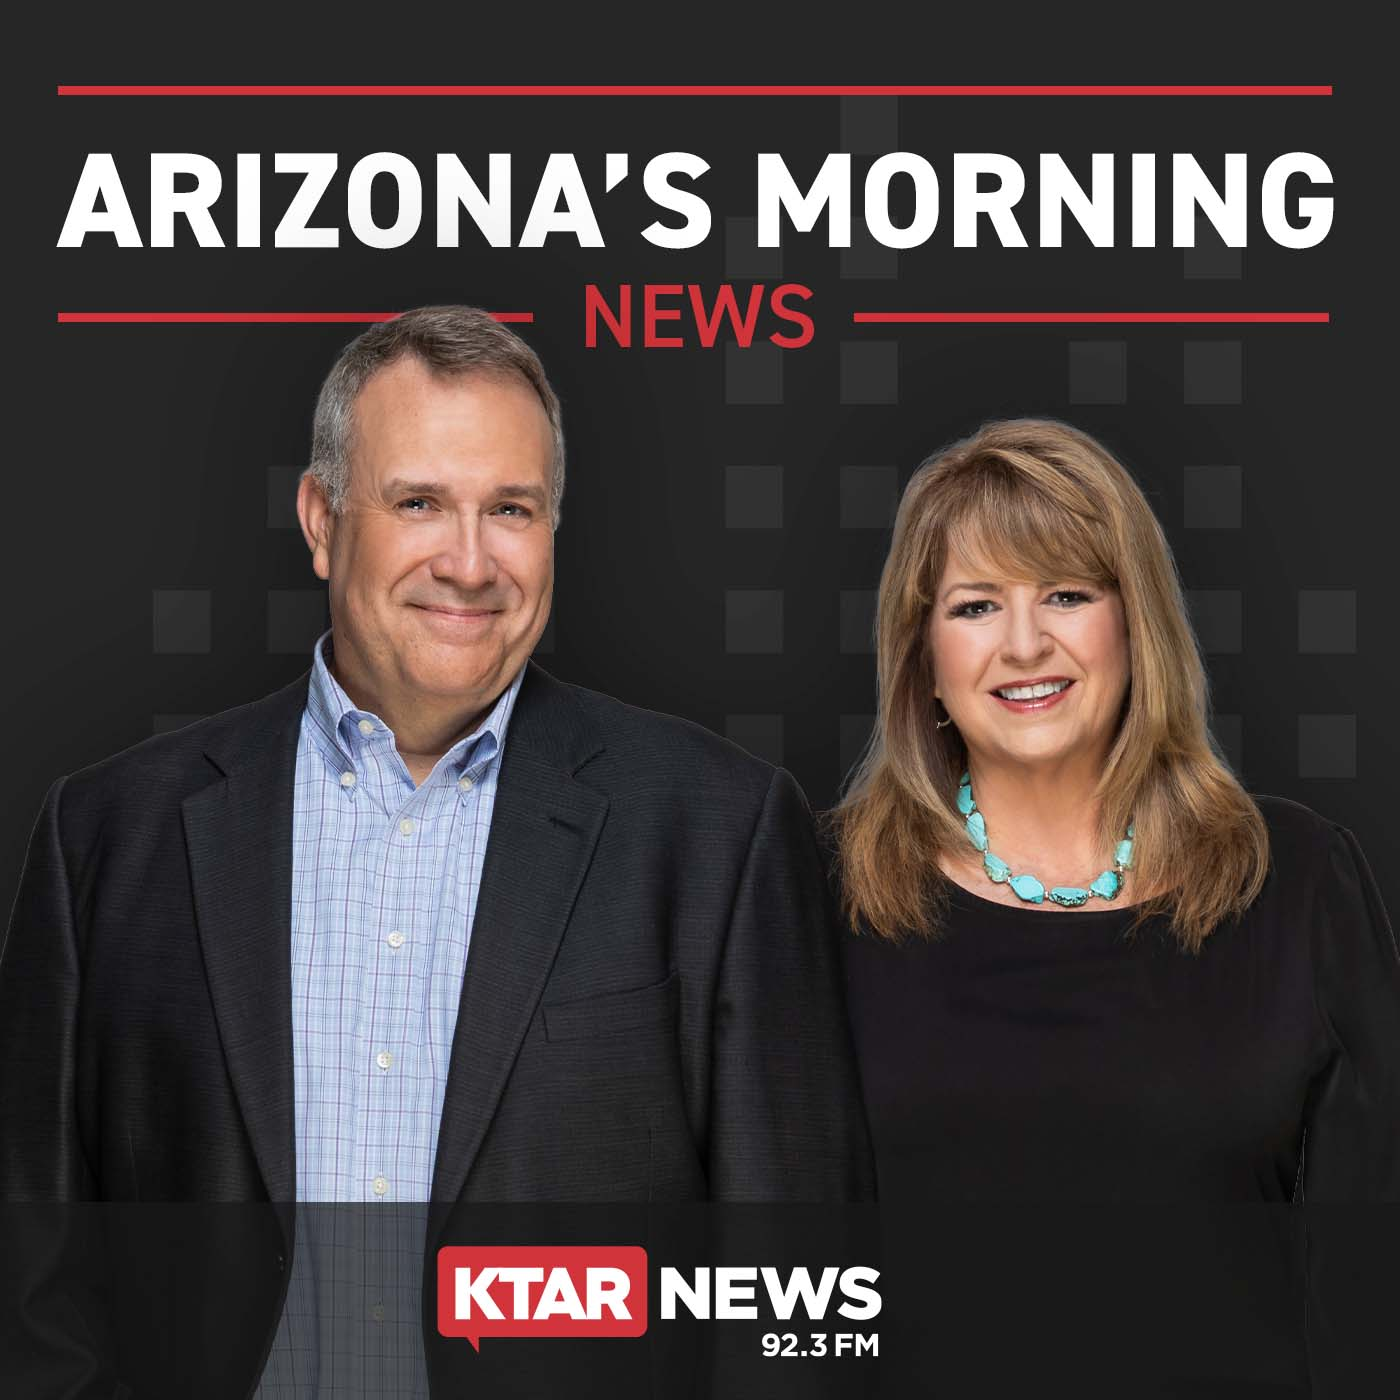 Sharper Point Commentary - The race for Arizona governor